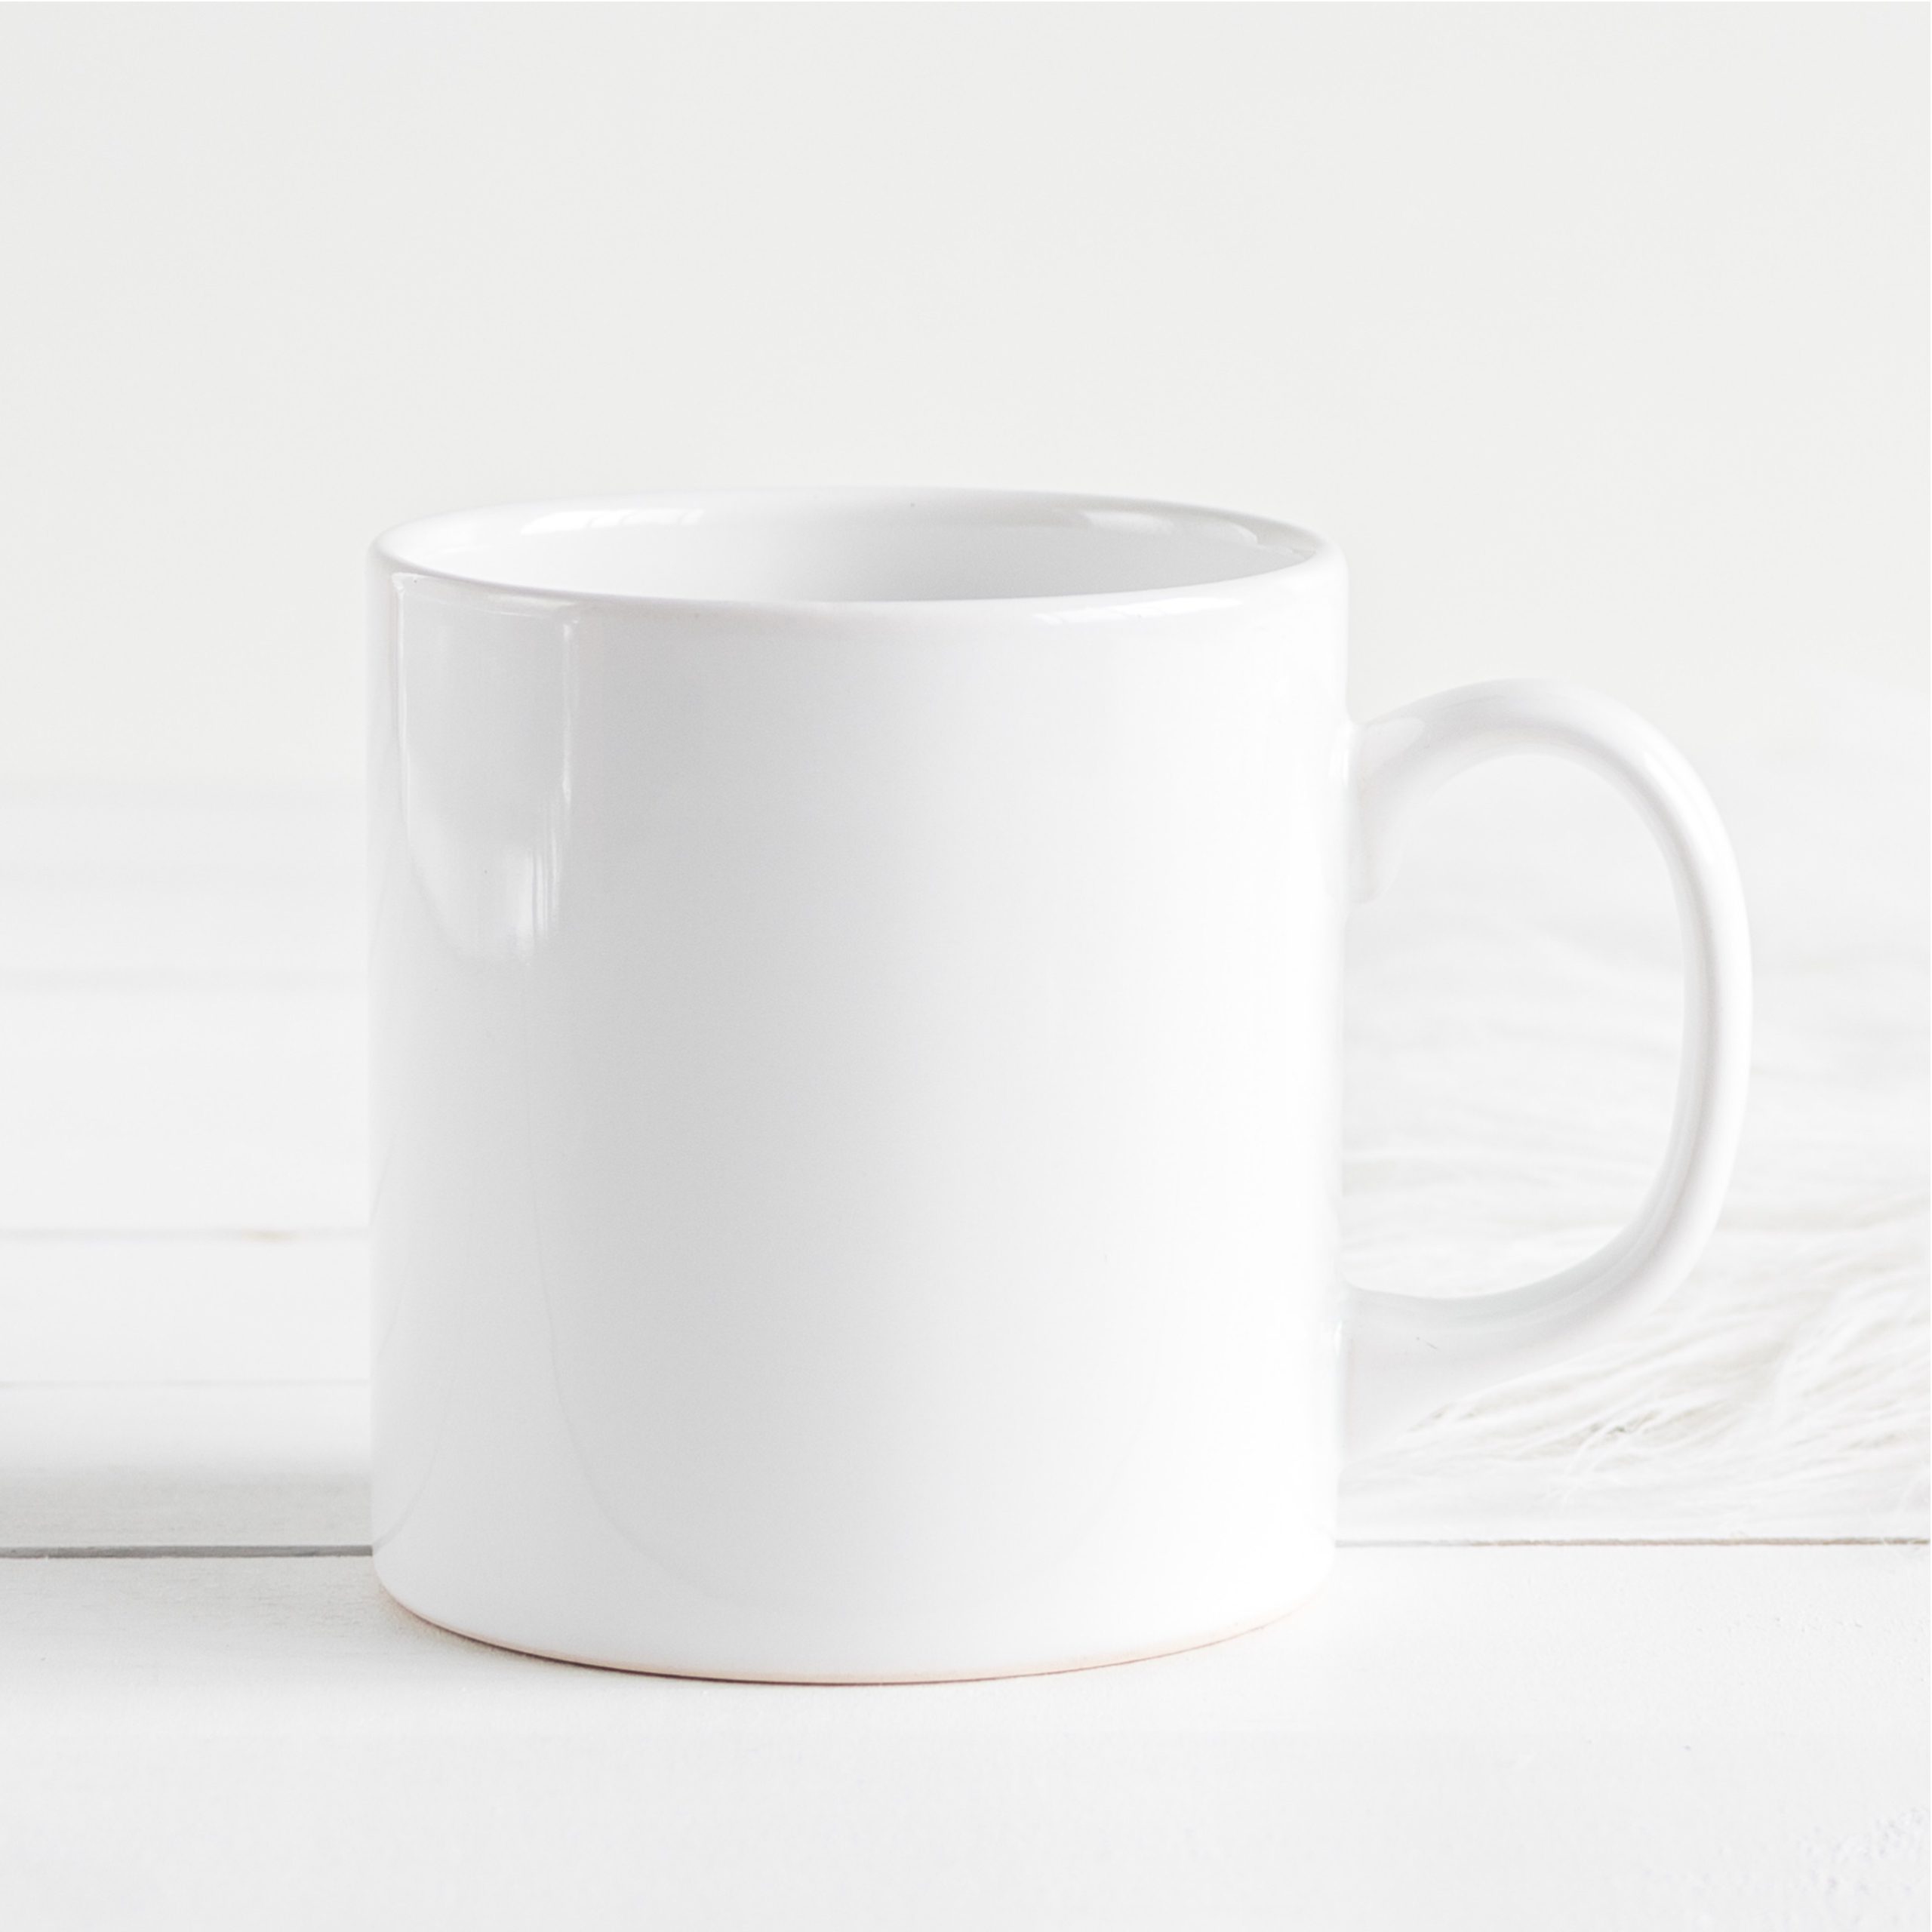 Personalise your own mug - Crafty Badger